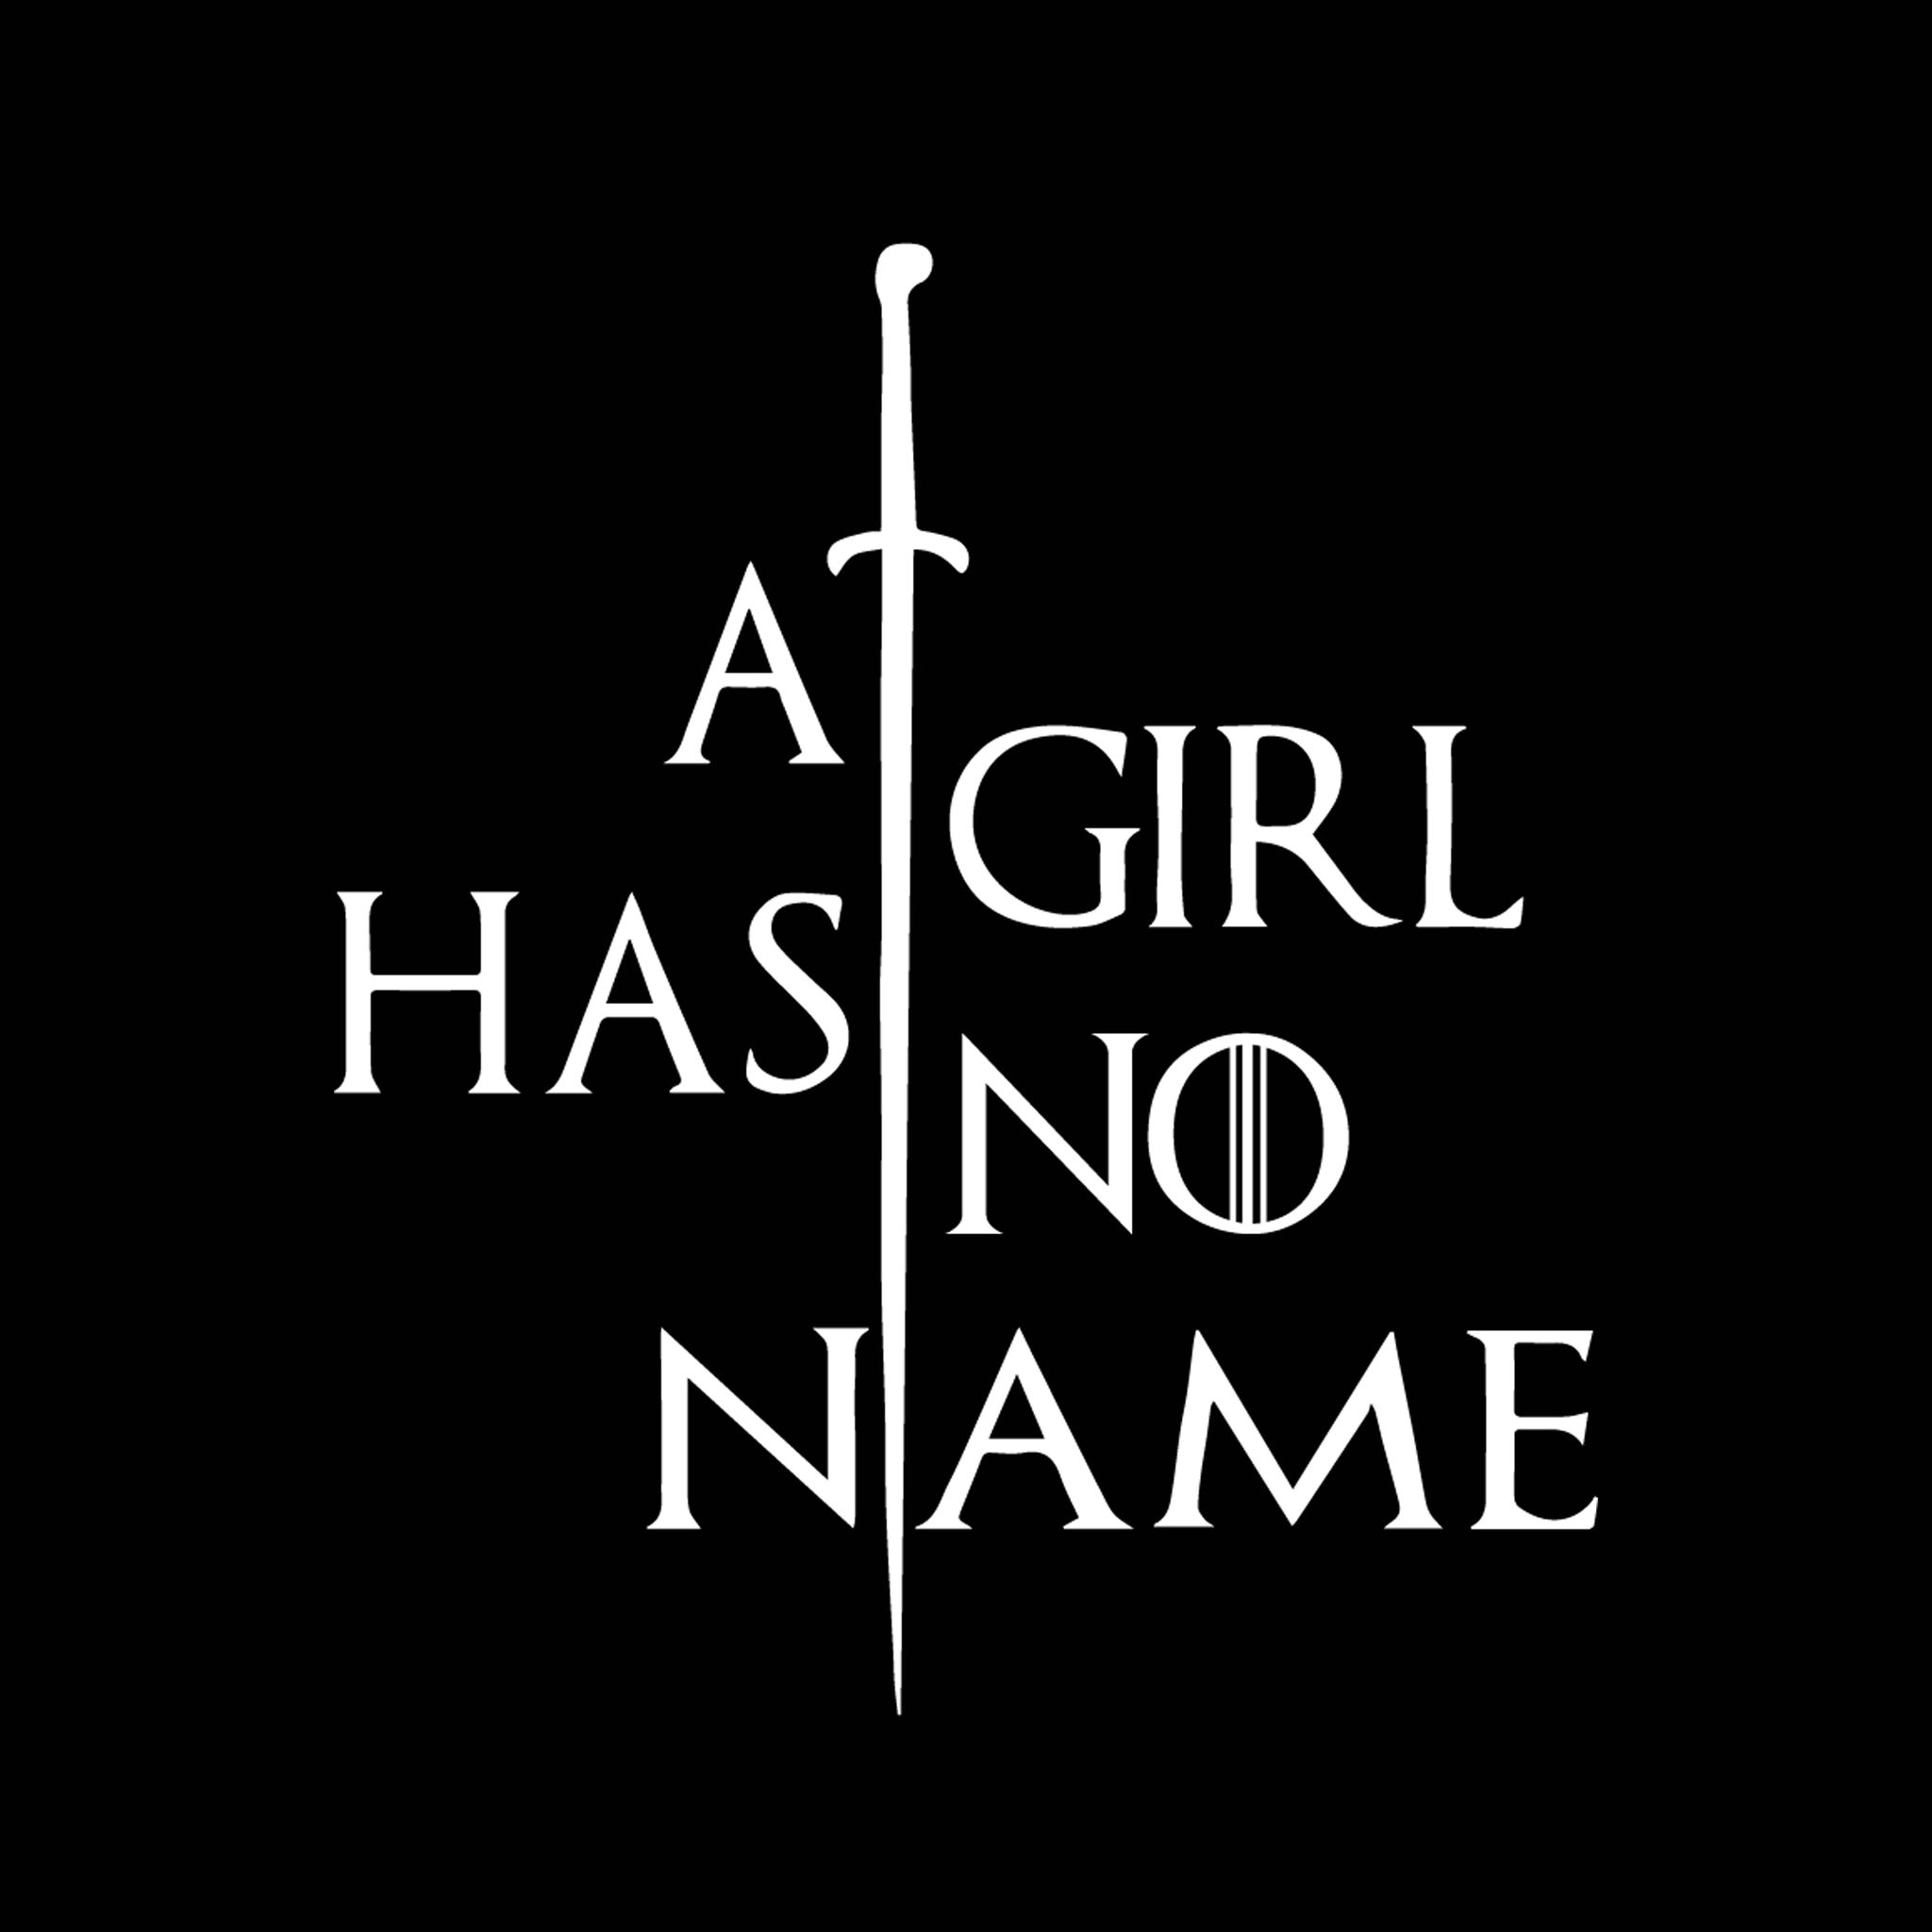 A Girl Has No Name, Game of Thrones svg, Game of Thrones clipart, Game of Thrones silhouette svg, png, dxf, eps file